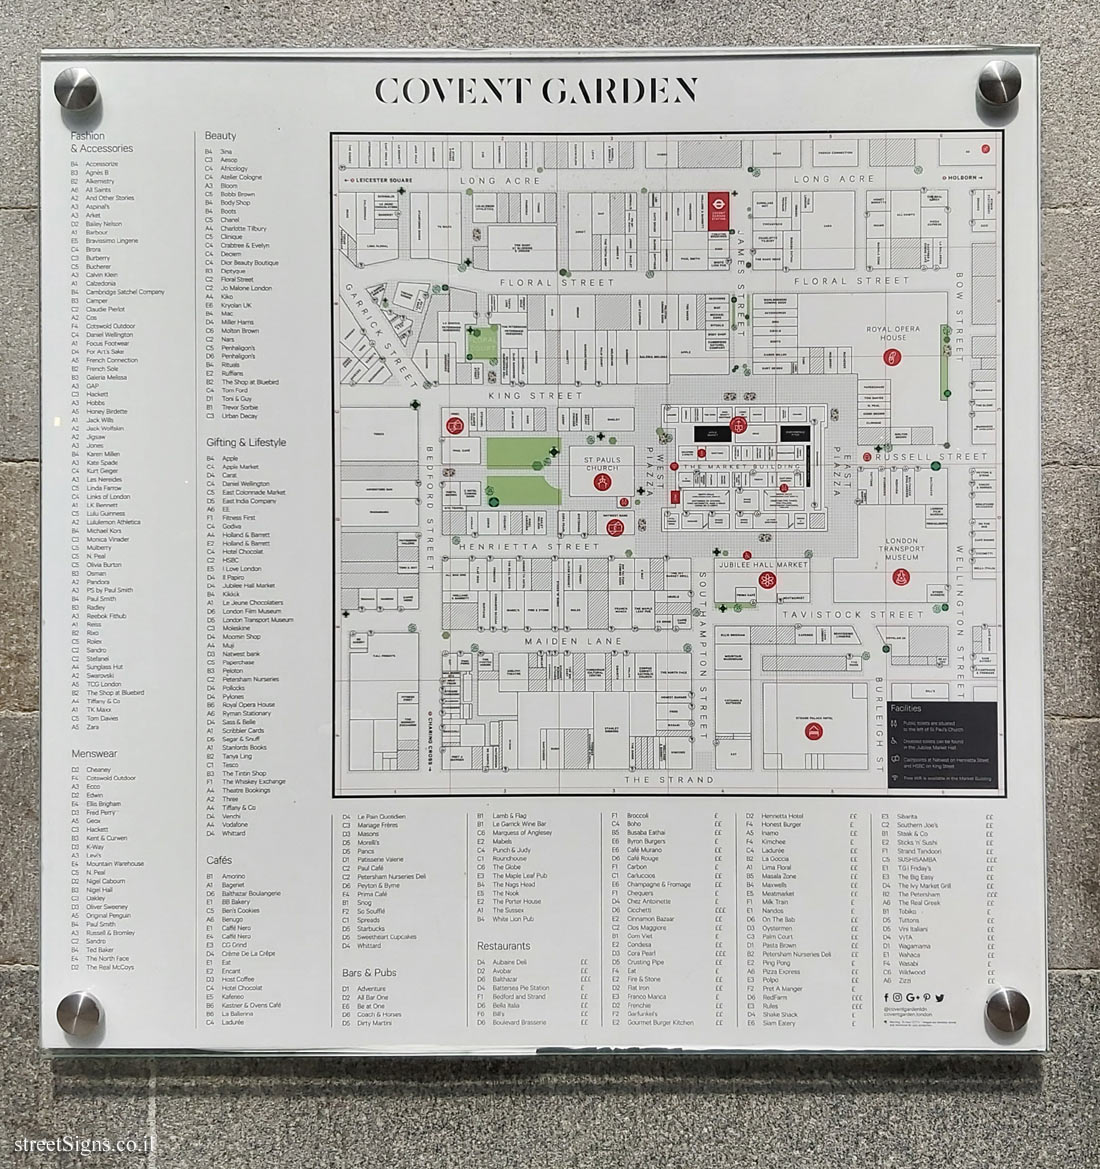 London - Map of Covent Garden